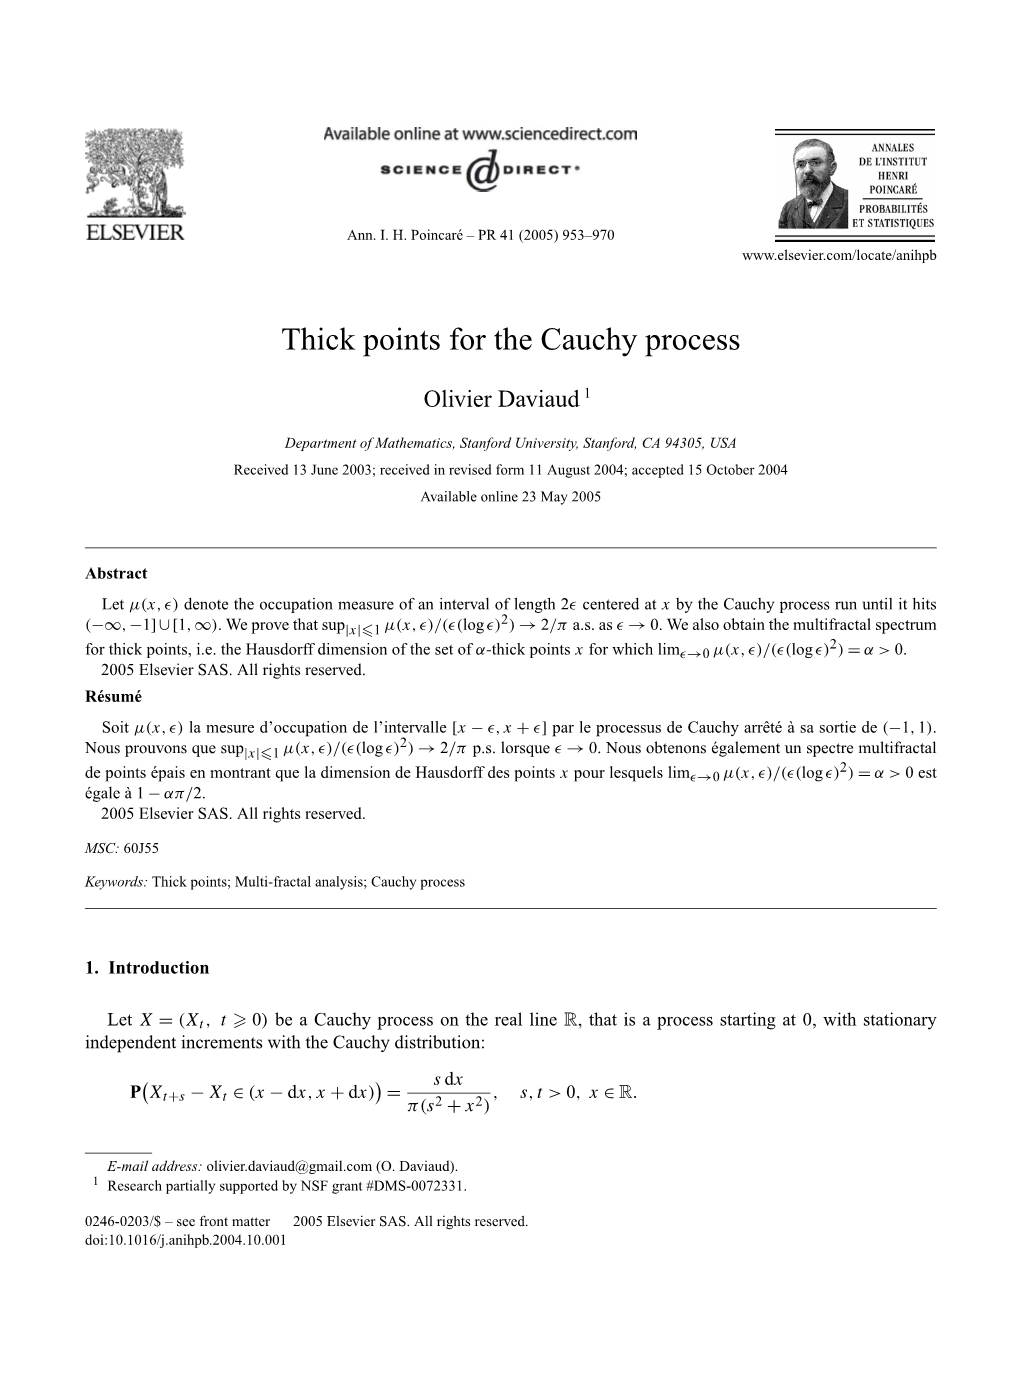 Thick Points for the Cauchy Process